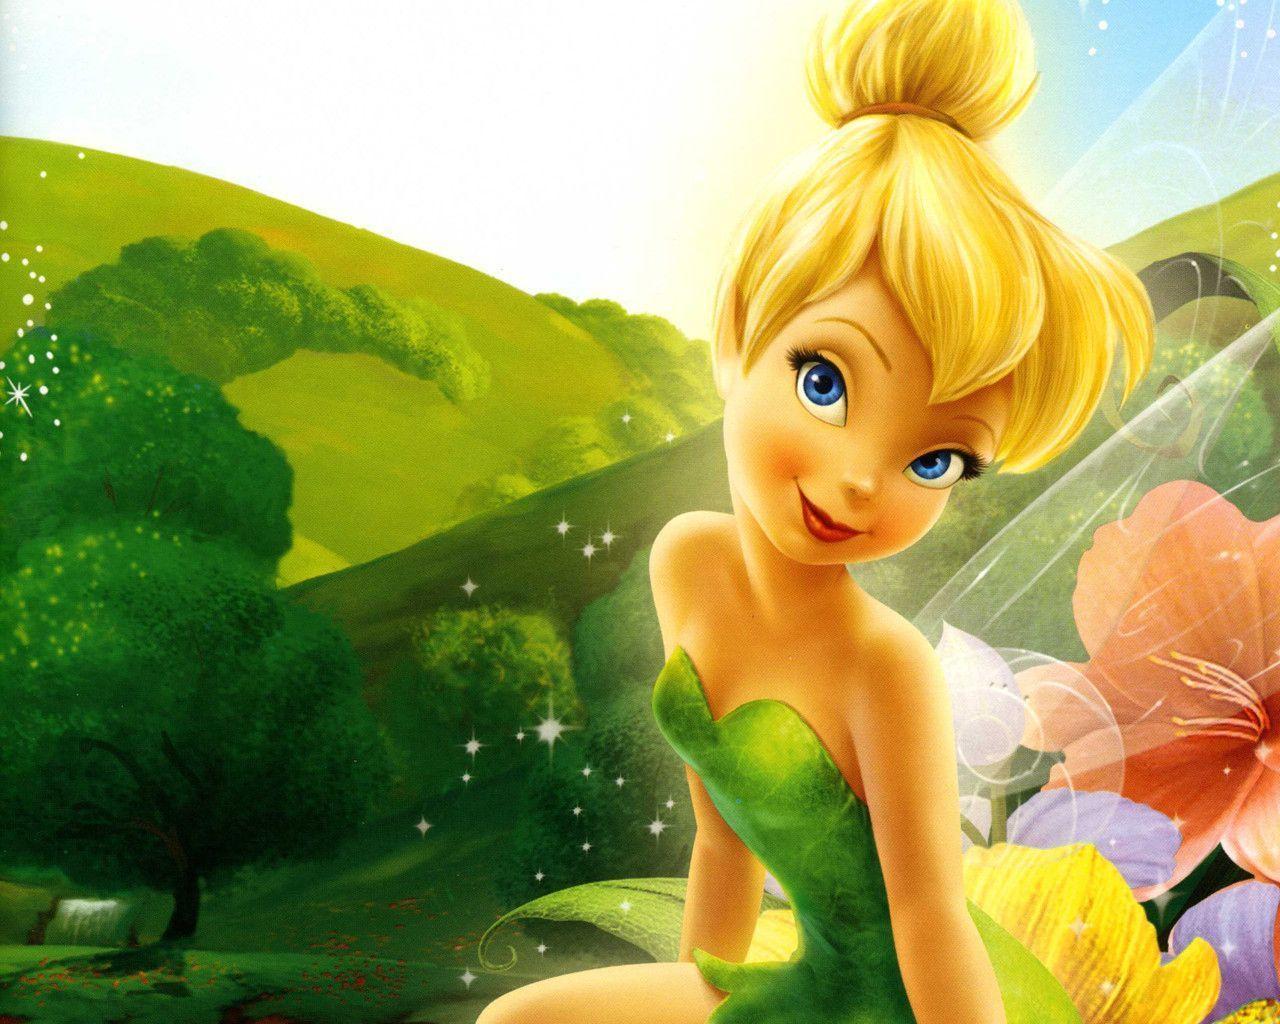 Find yourself a great Tinkerbell wallpaper with the Disney fairies